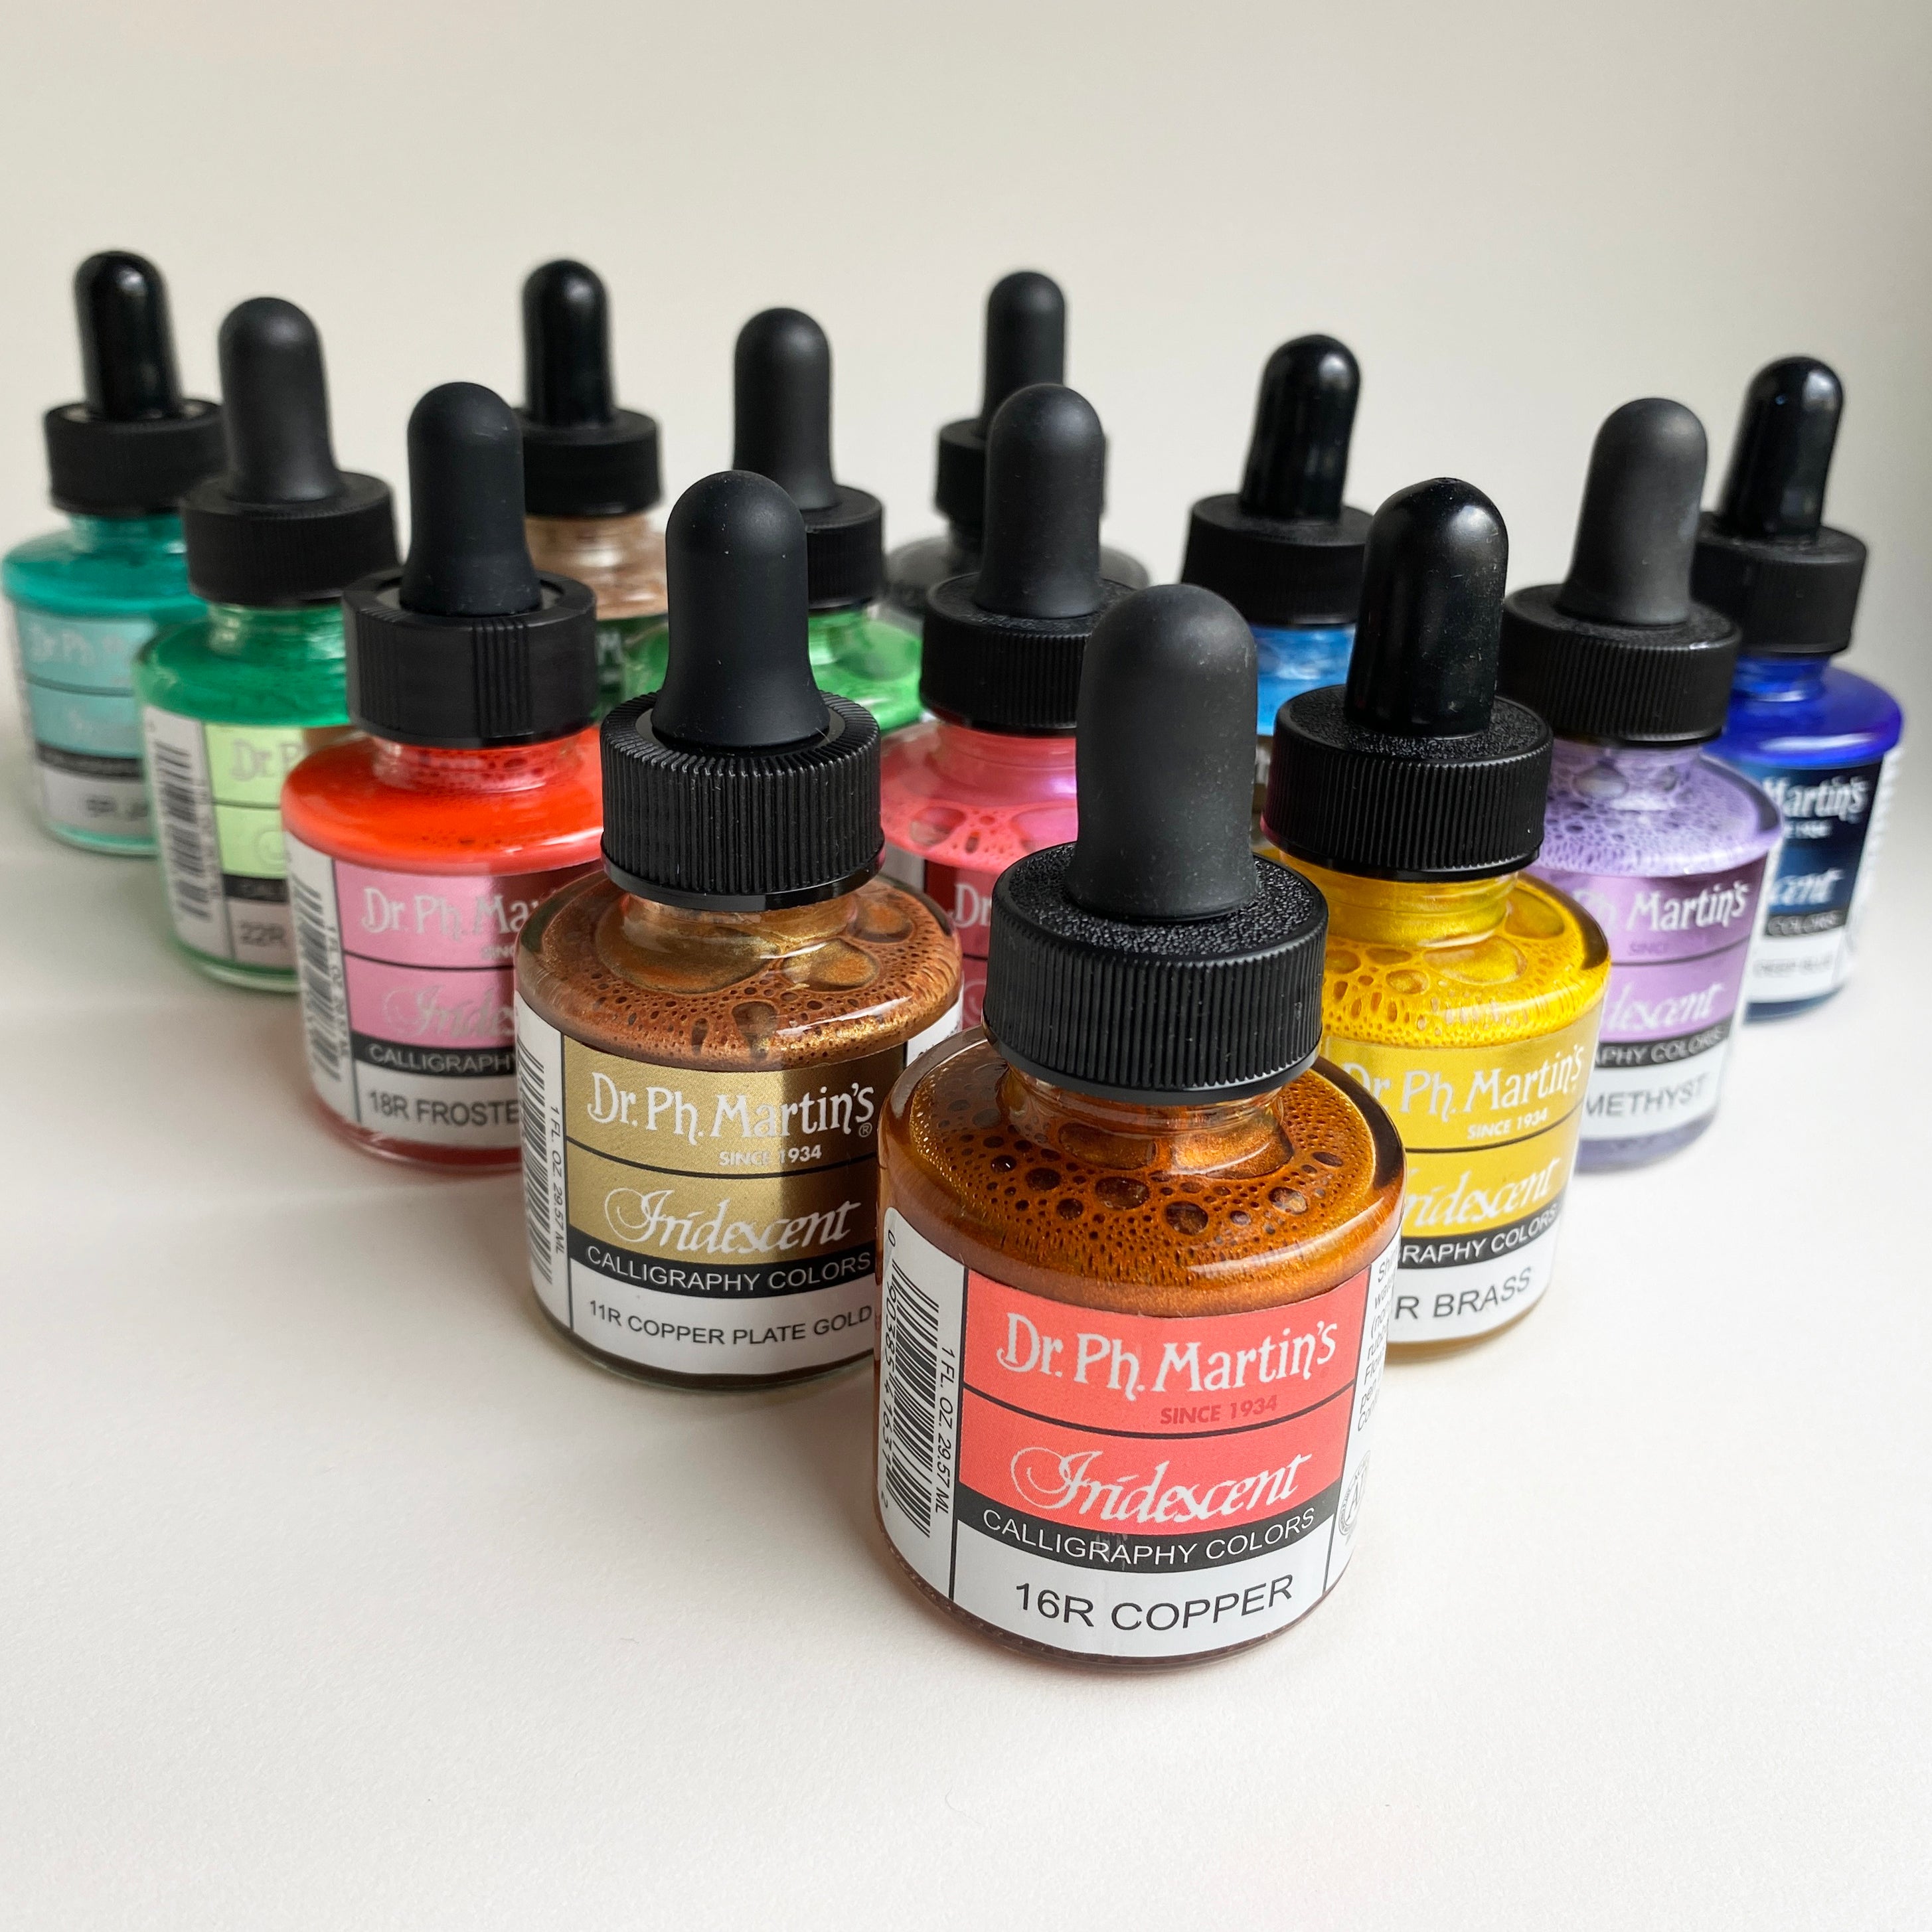 Dr Ph Martin's Iridescent Calligraphy Ink – Meticulous Ink